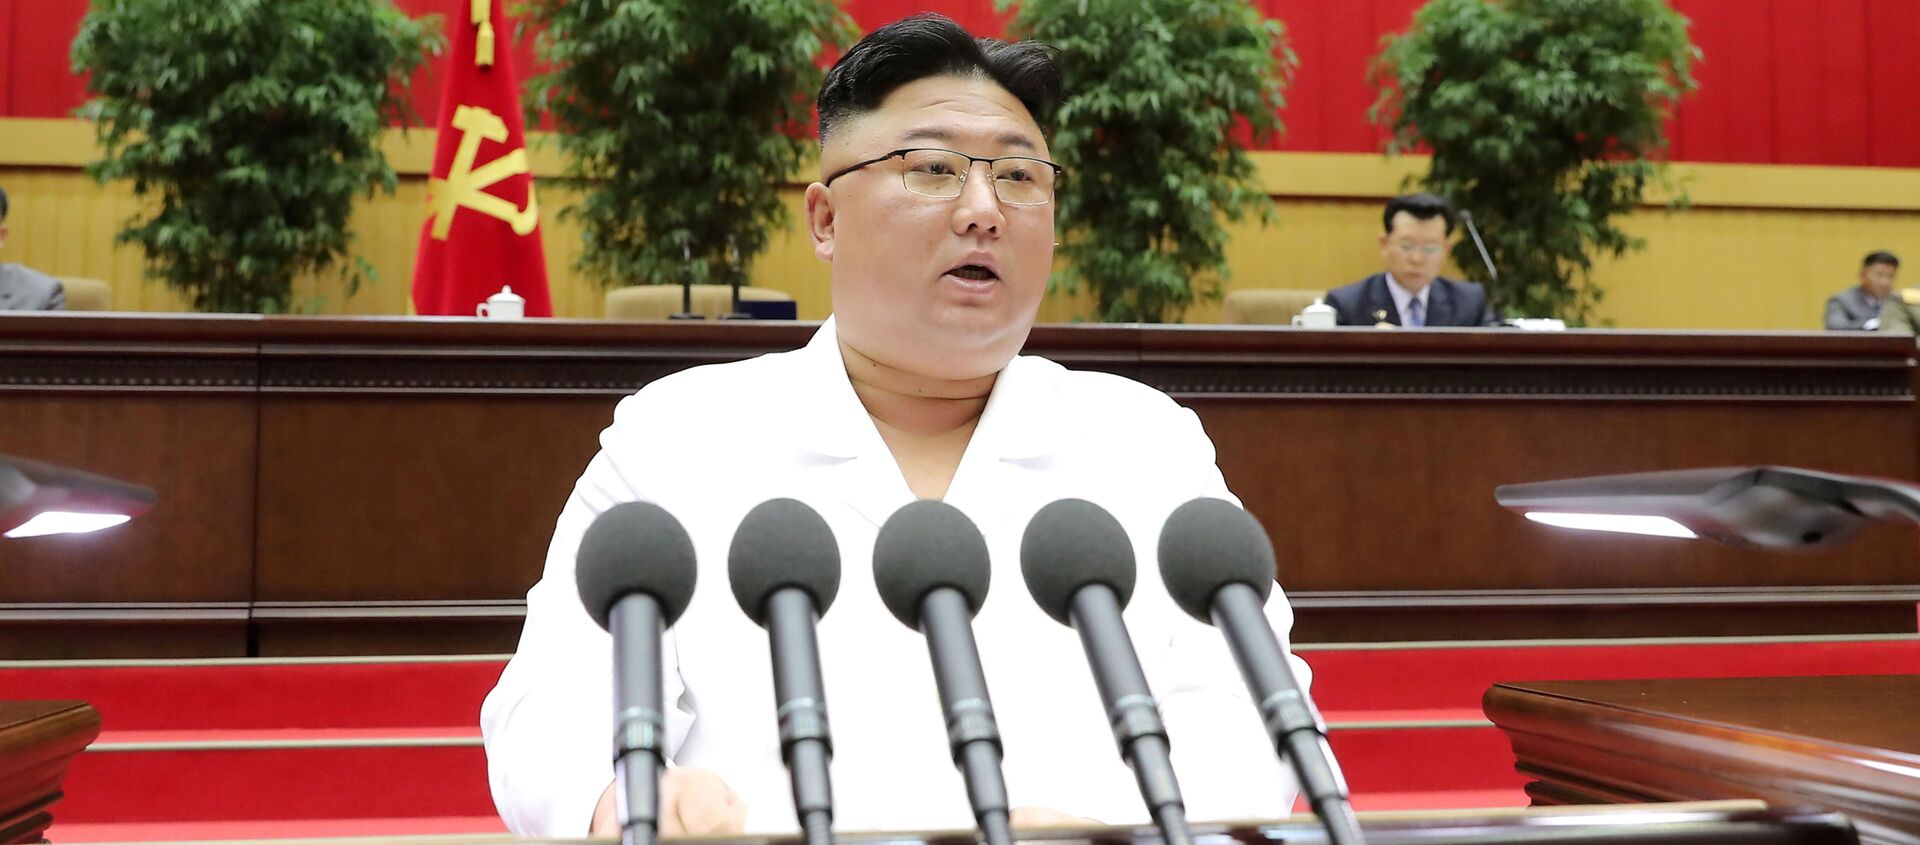 North Korean leader Kim Jong Un addresses a conference of cell secretaries of the ruling Workers' Party in Pyongyang, in this undated photo released on April 7, 2021 by North Korea's Korean Central News Agency (KCNA). - Sputnik International, 1920, 18.06.2021